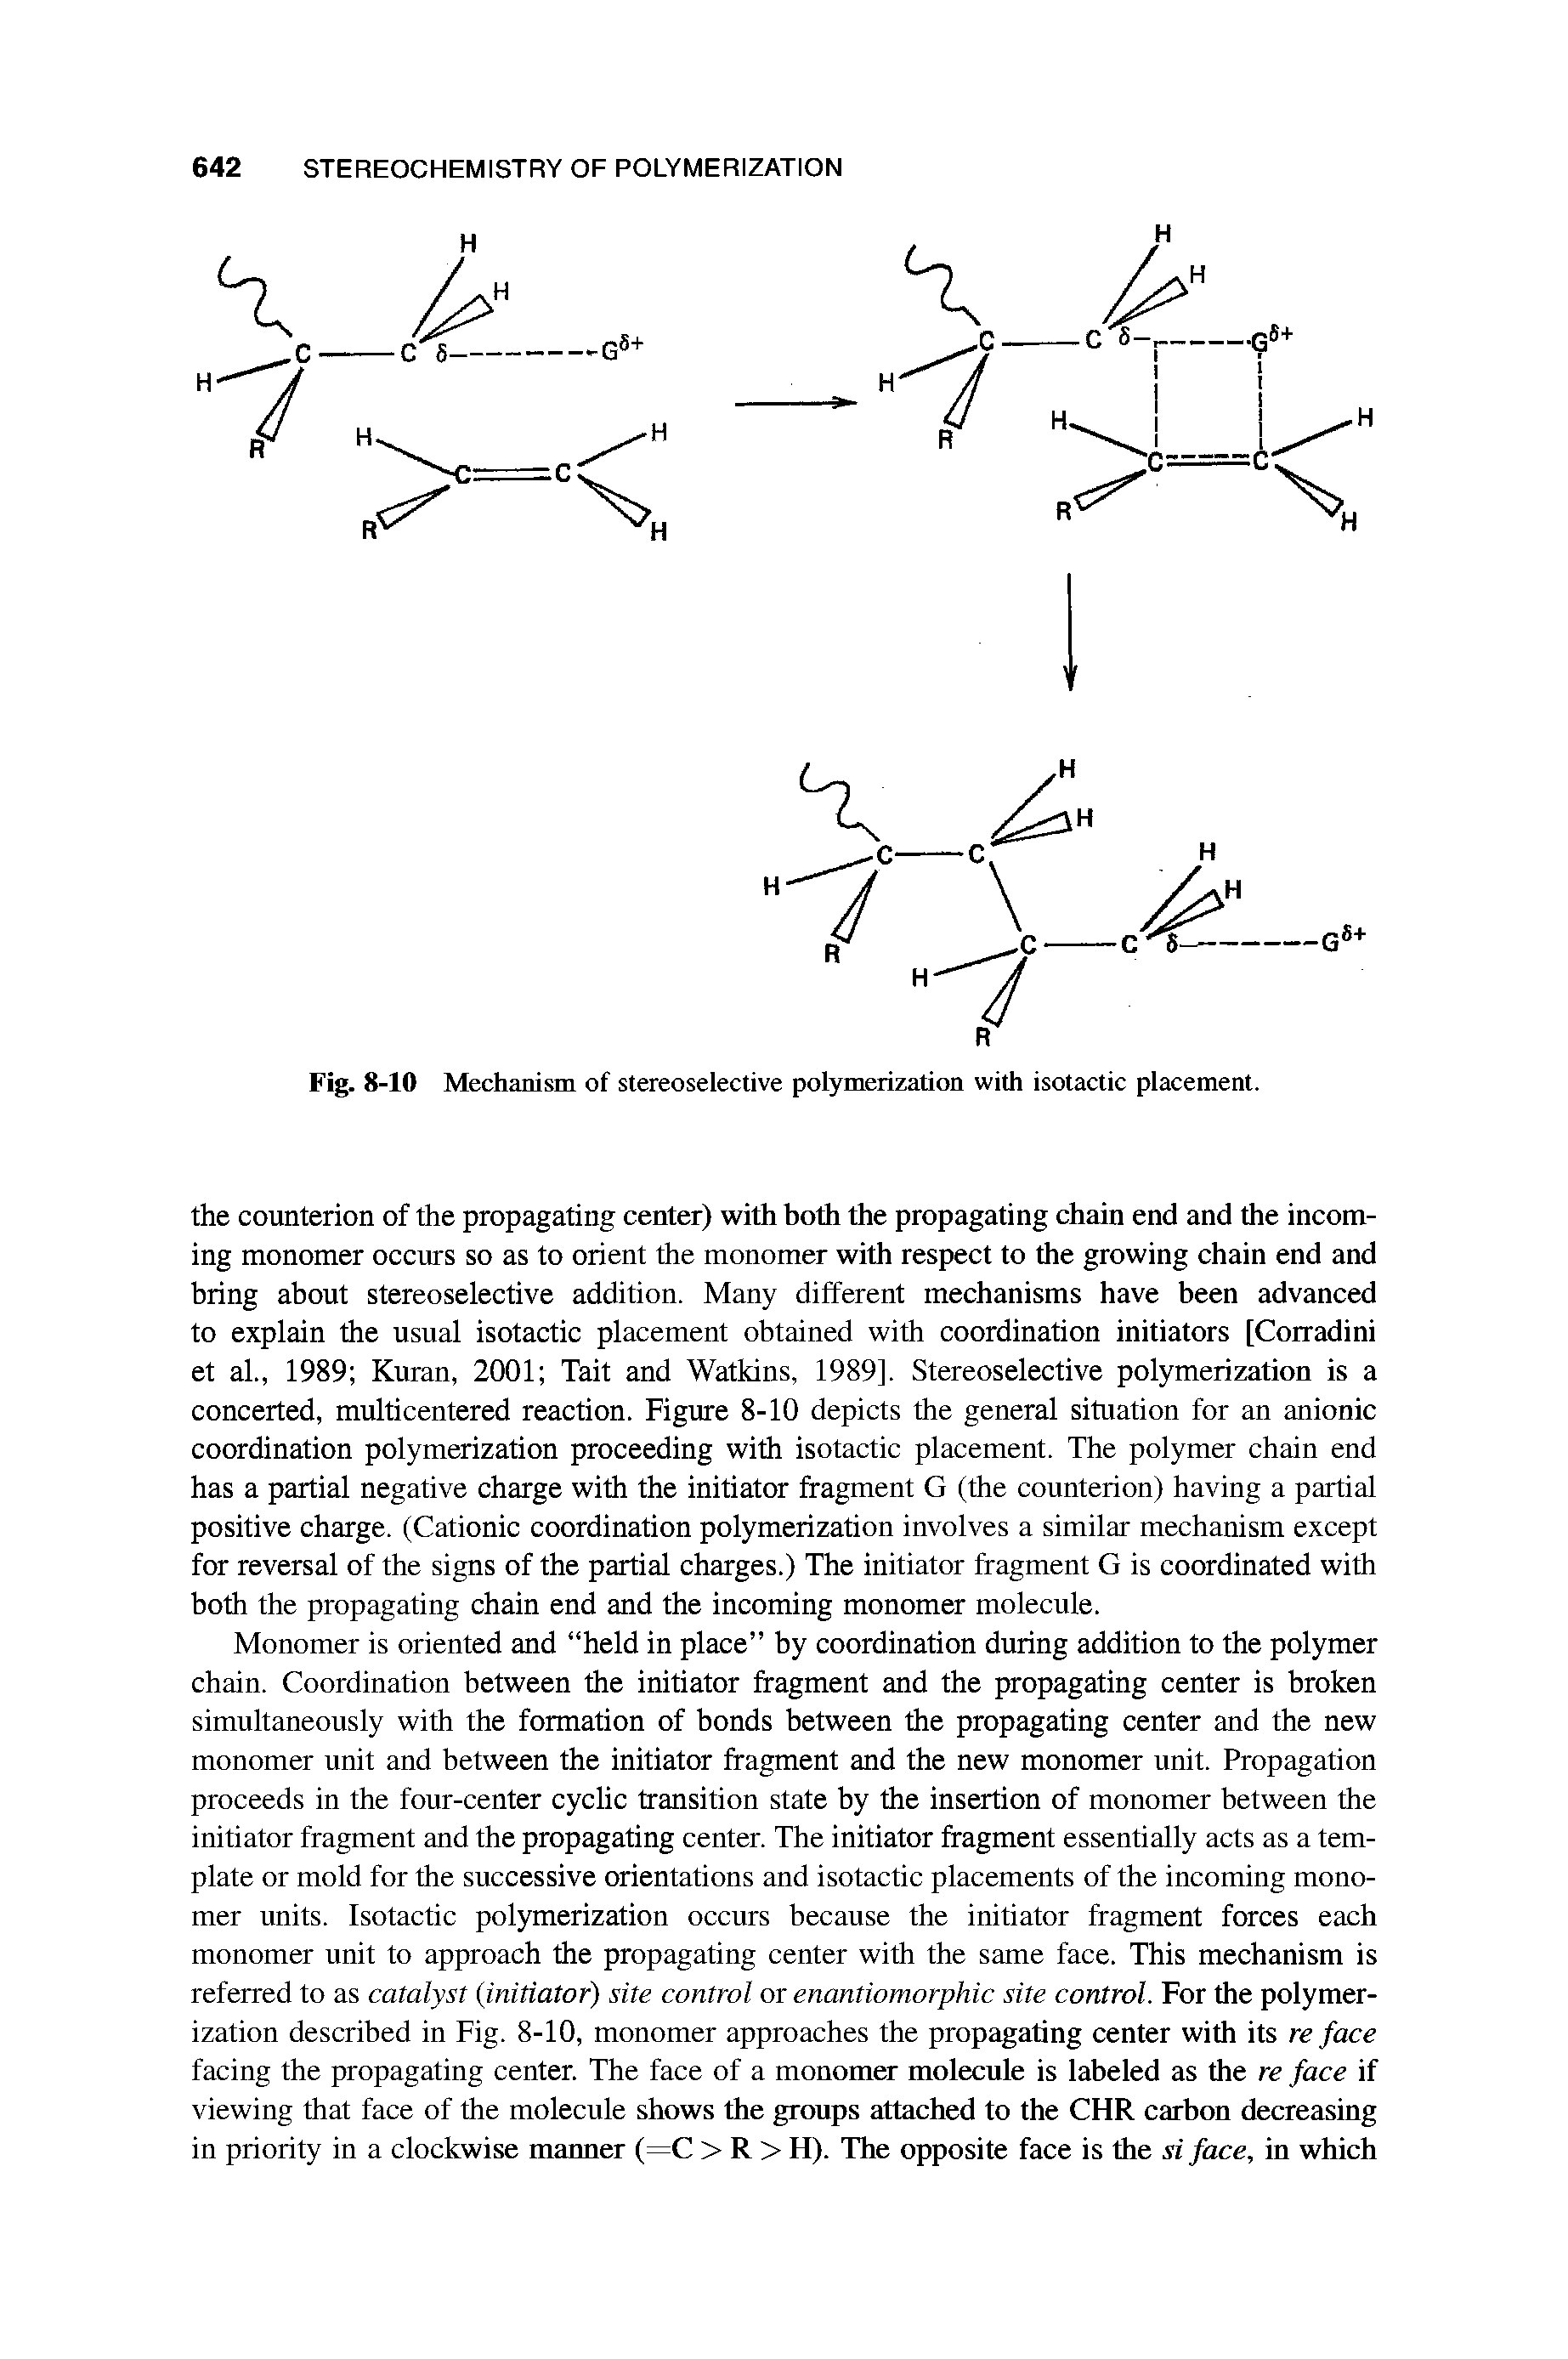 Fig. 8-10 Mechanism of stereoselective polymerization with isotactic placement.